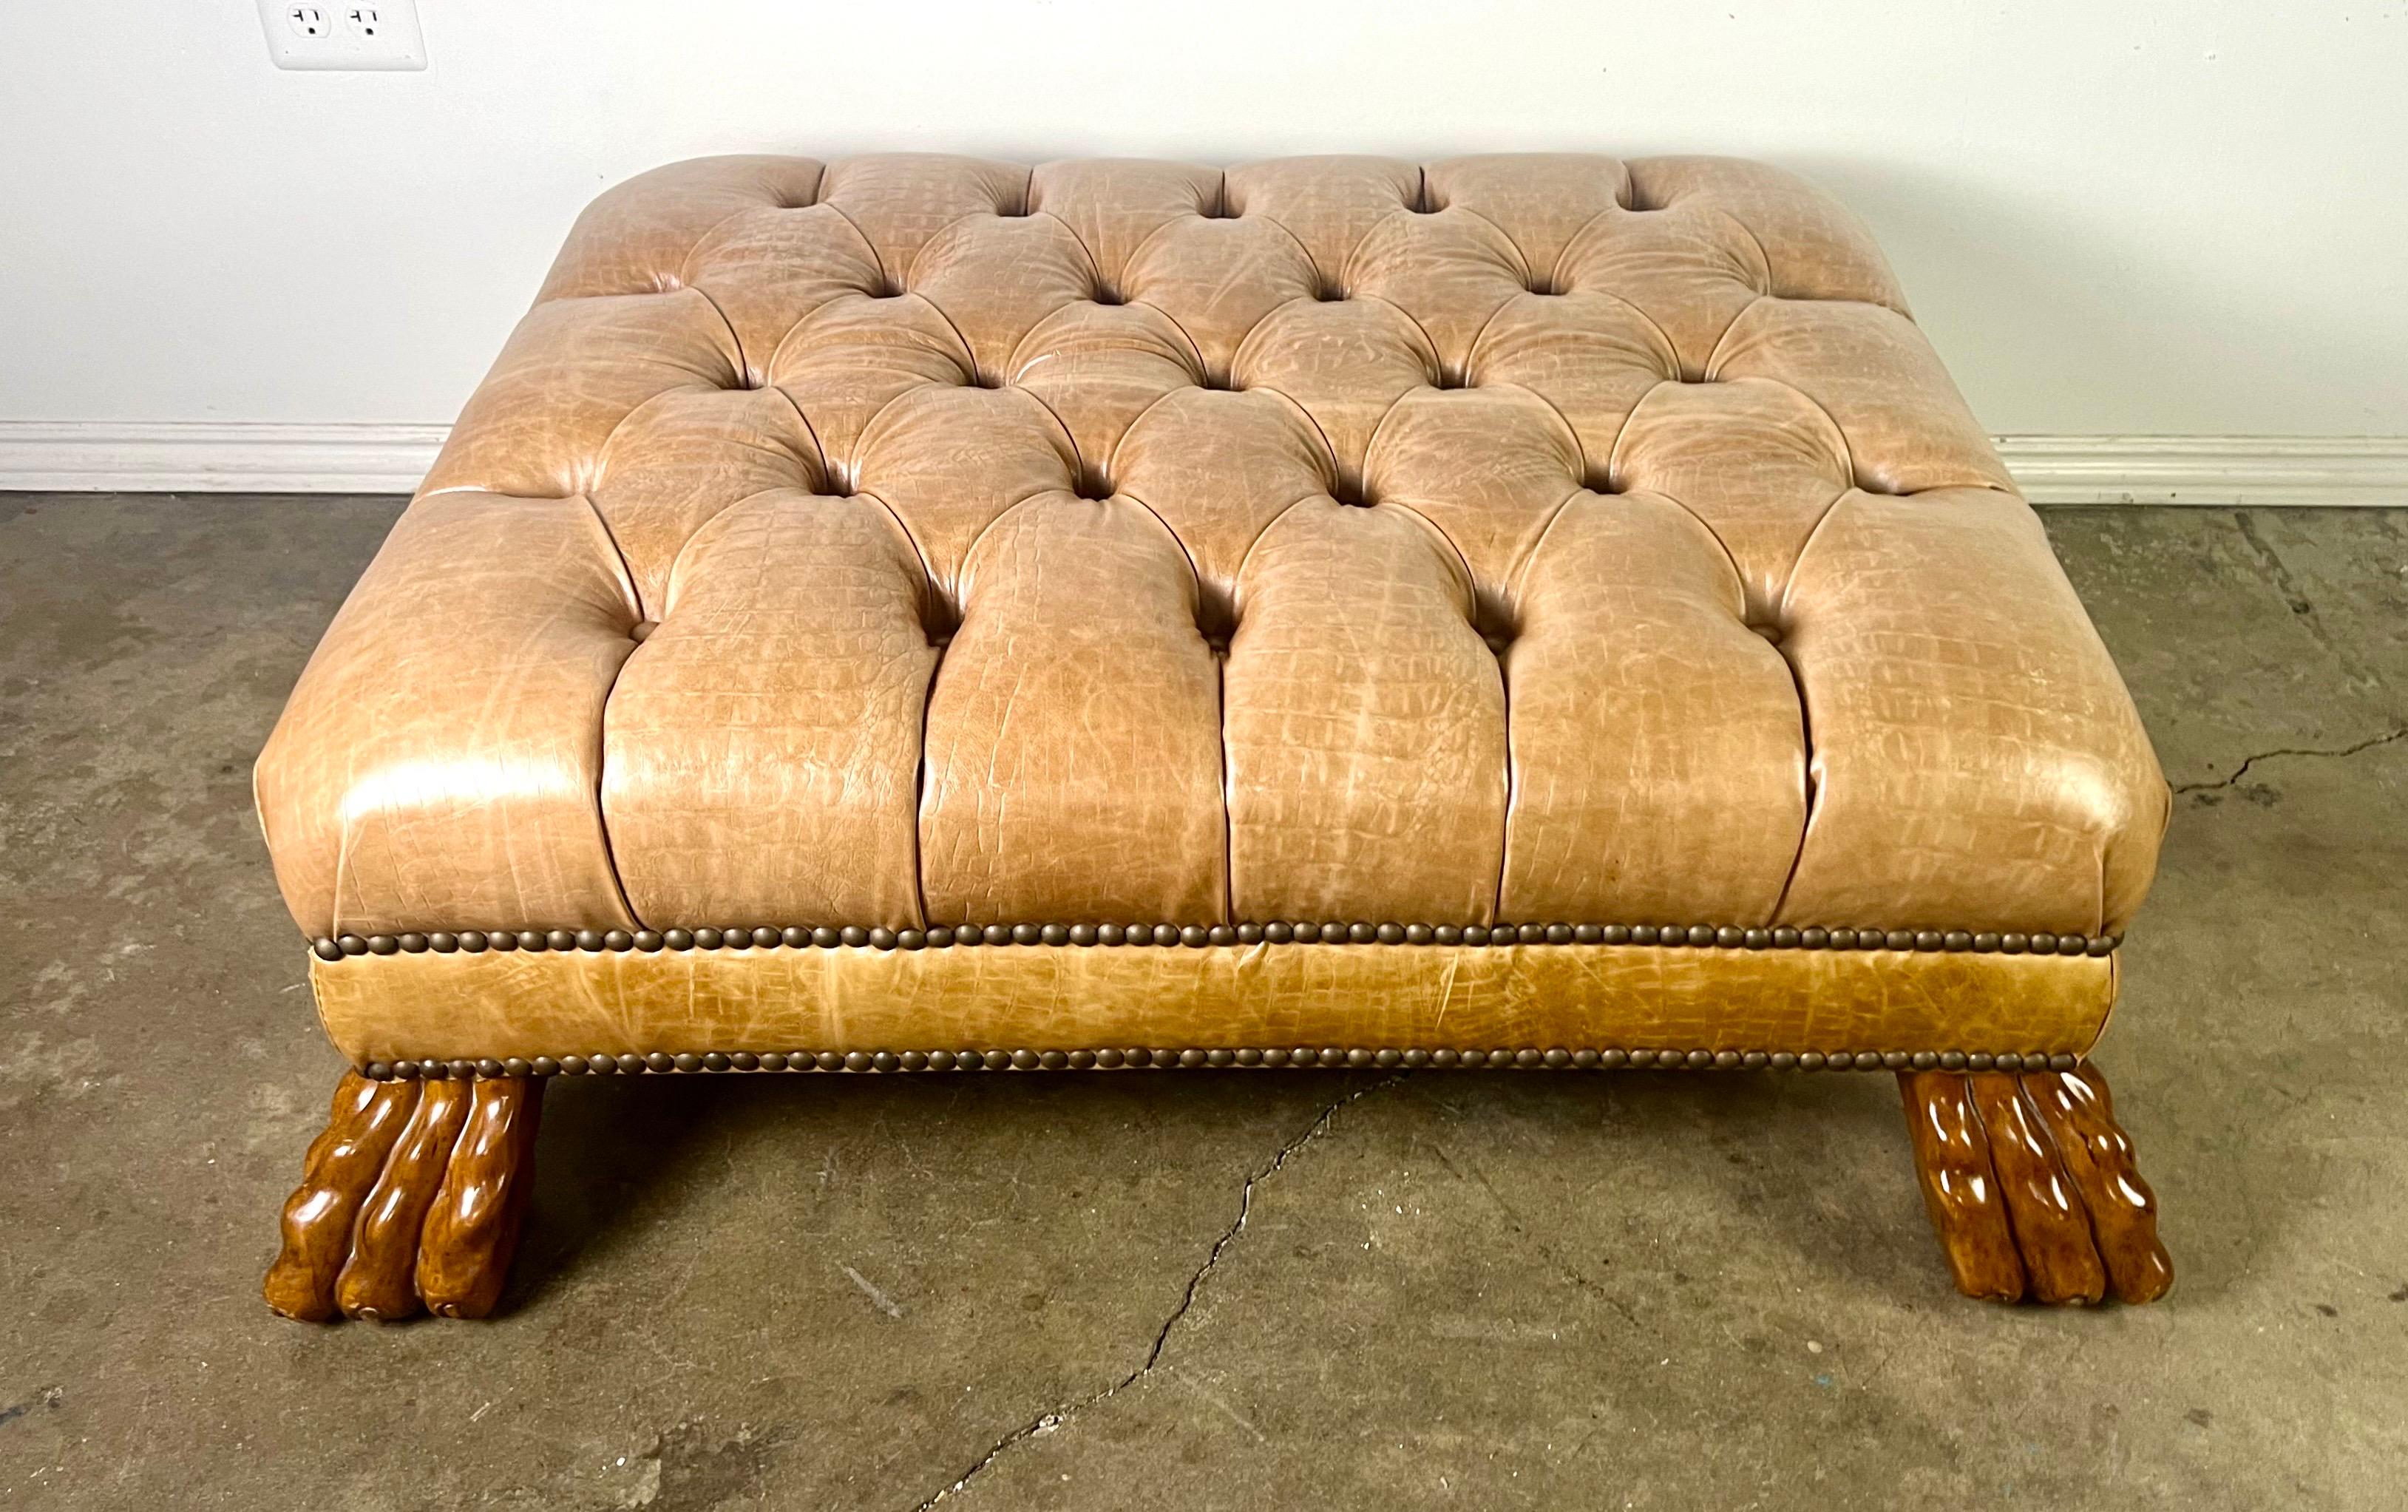 This classic English tufted embossed leather ottoman is supported by ornately carved feet, resembling lion paws-a feature often seen in Regency-style furniture.  The craftsmanship is detailed, including nailheads, emphasizing the traditional